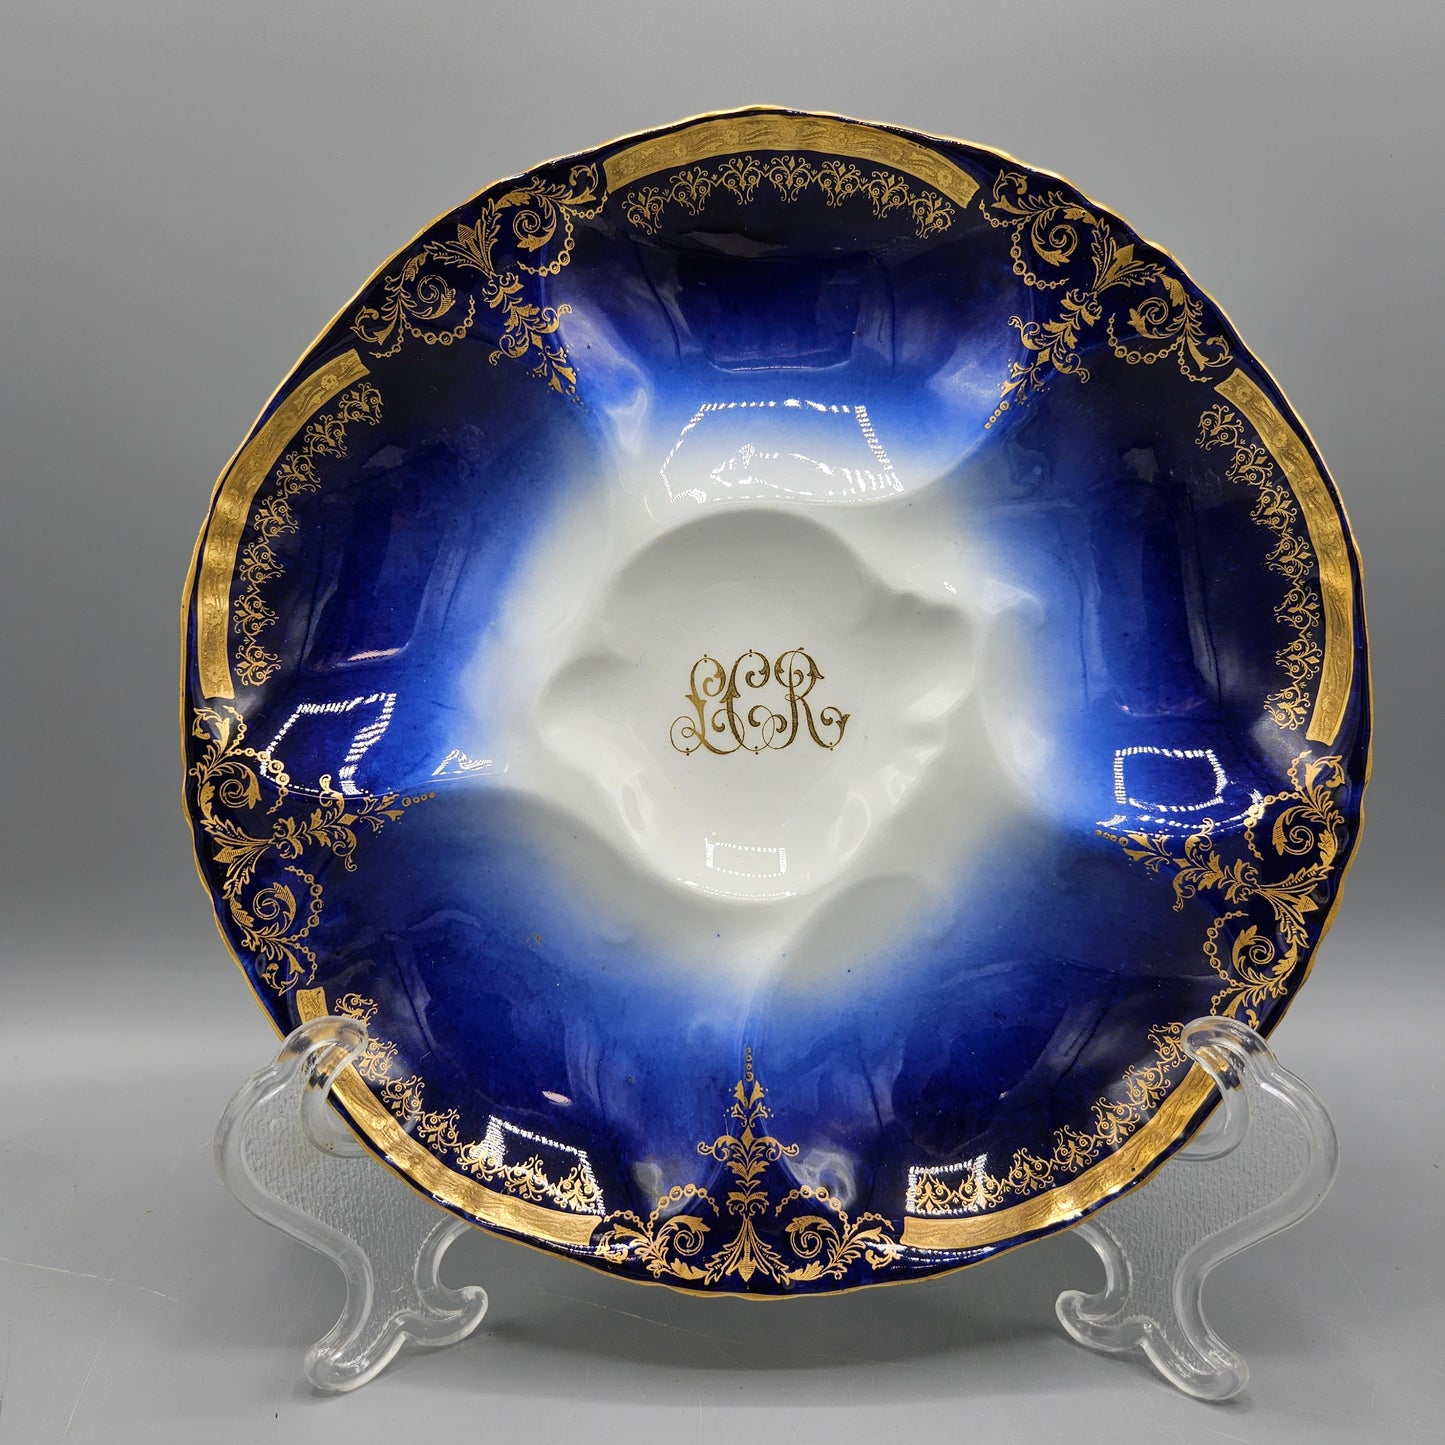 OP Co Onondaga Pottery (Syracuse China) Cobalt Blue Ground Oyster Plate